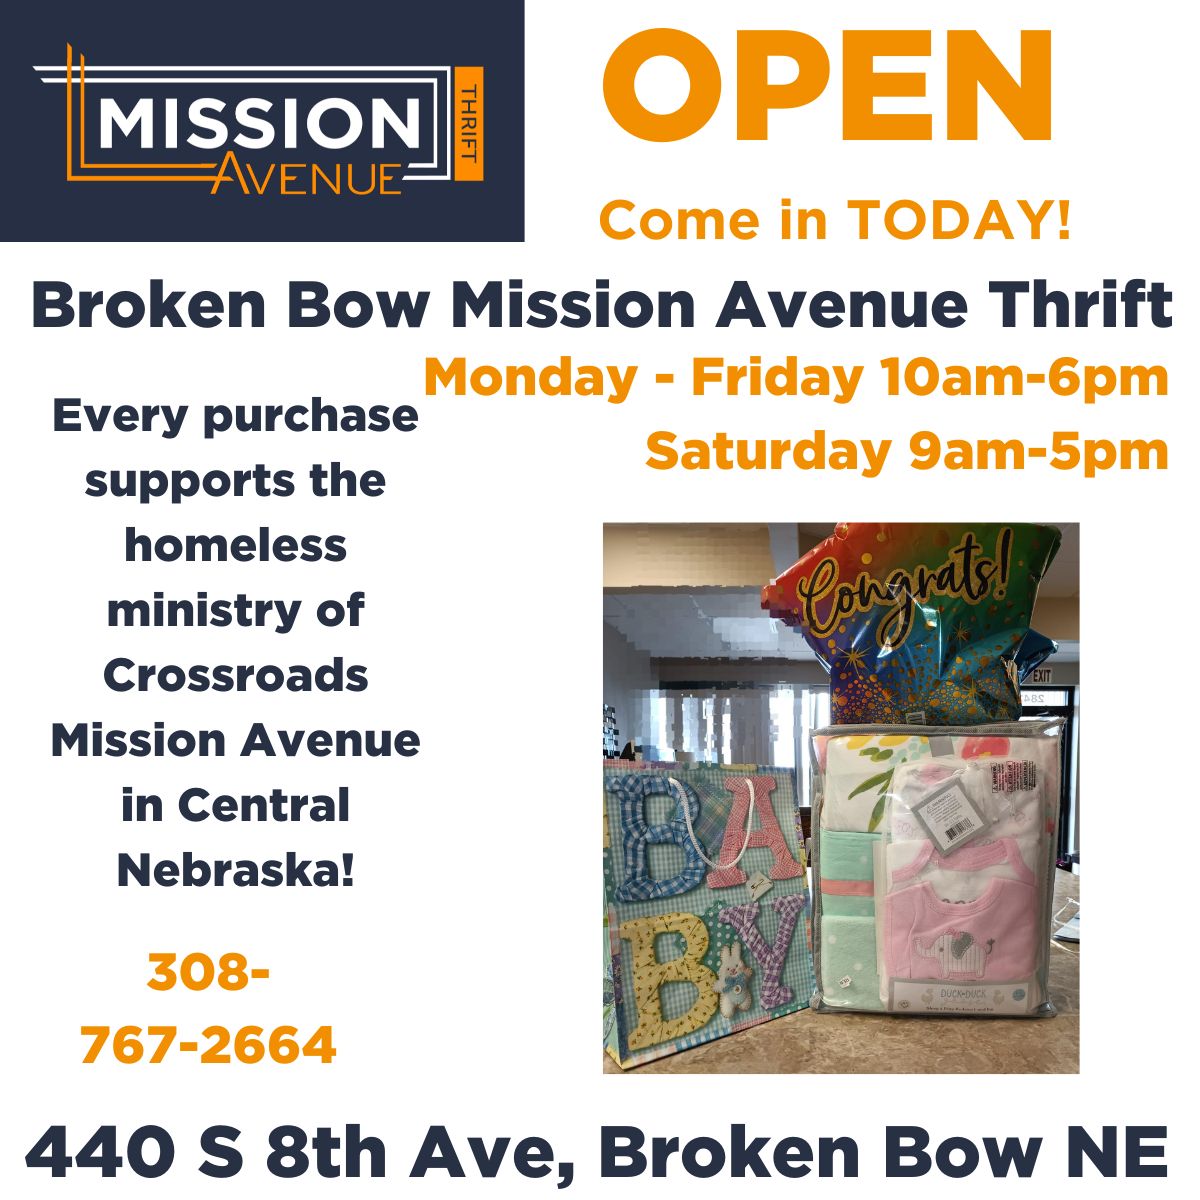 Come in TODAY and see what's NEW at Broken Bow Mission Avenue Thrift! crossroadsmission.com/thrift-stores/ #MissionAvenueThrift #BrokenBowNebraska #Thriftstore #Shoptoday